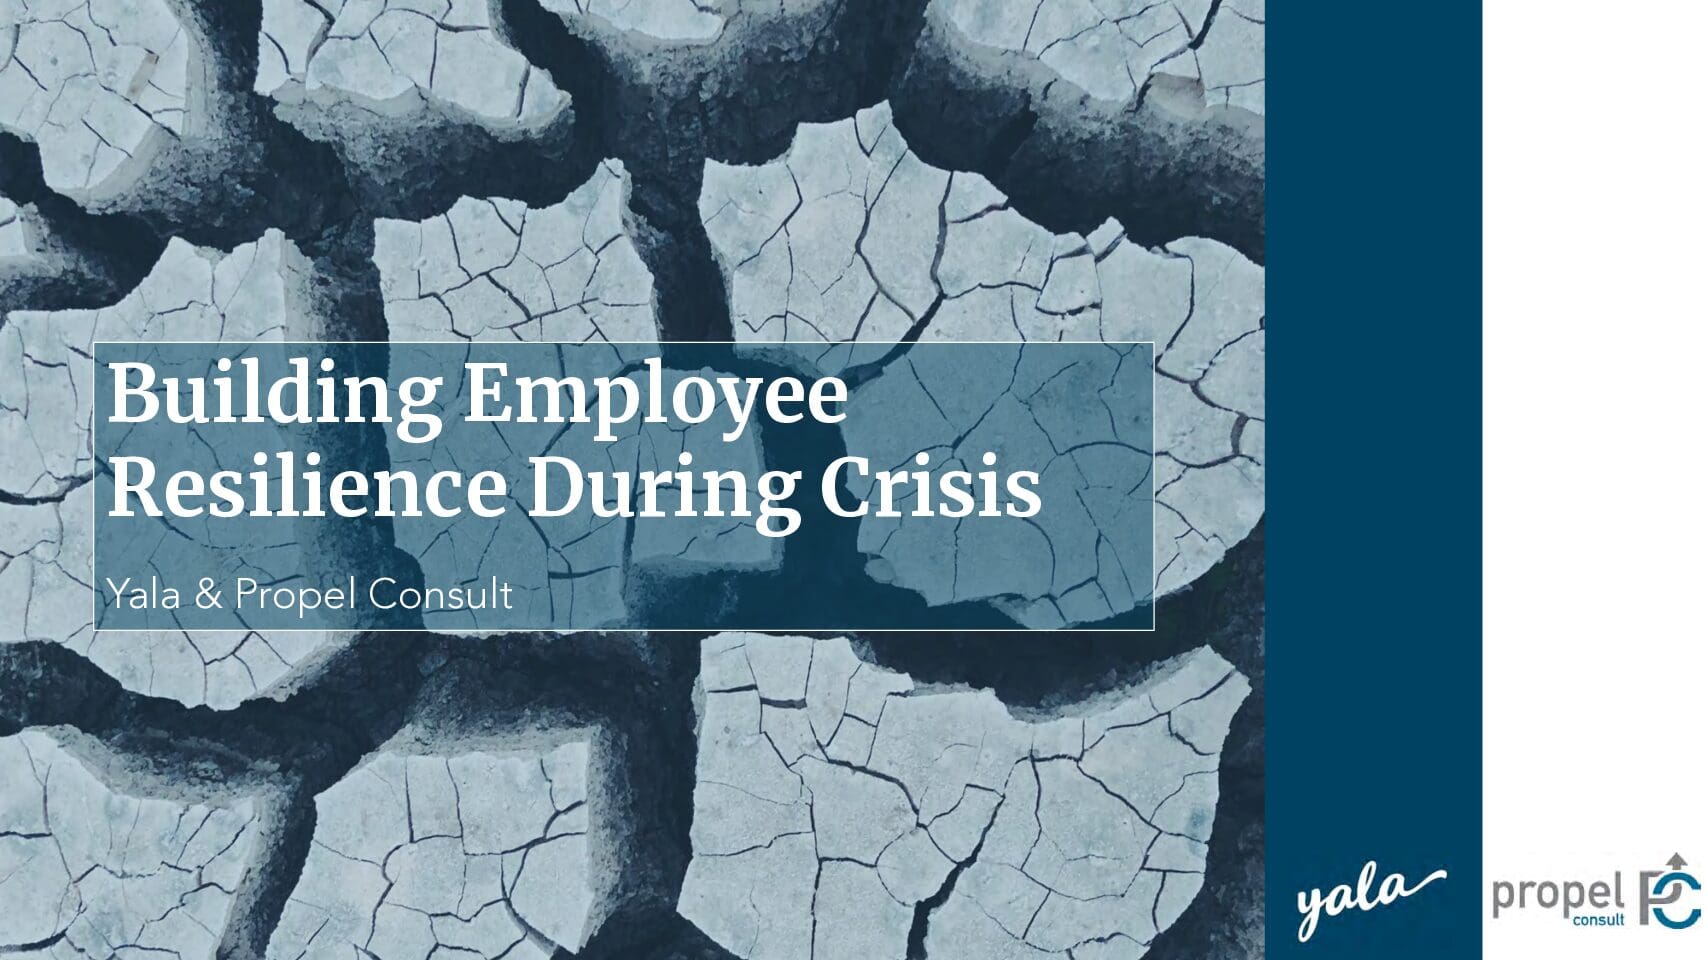 Building Employee Resilience During Crisis